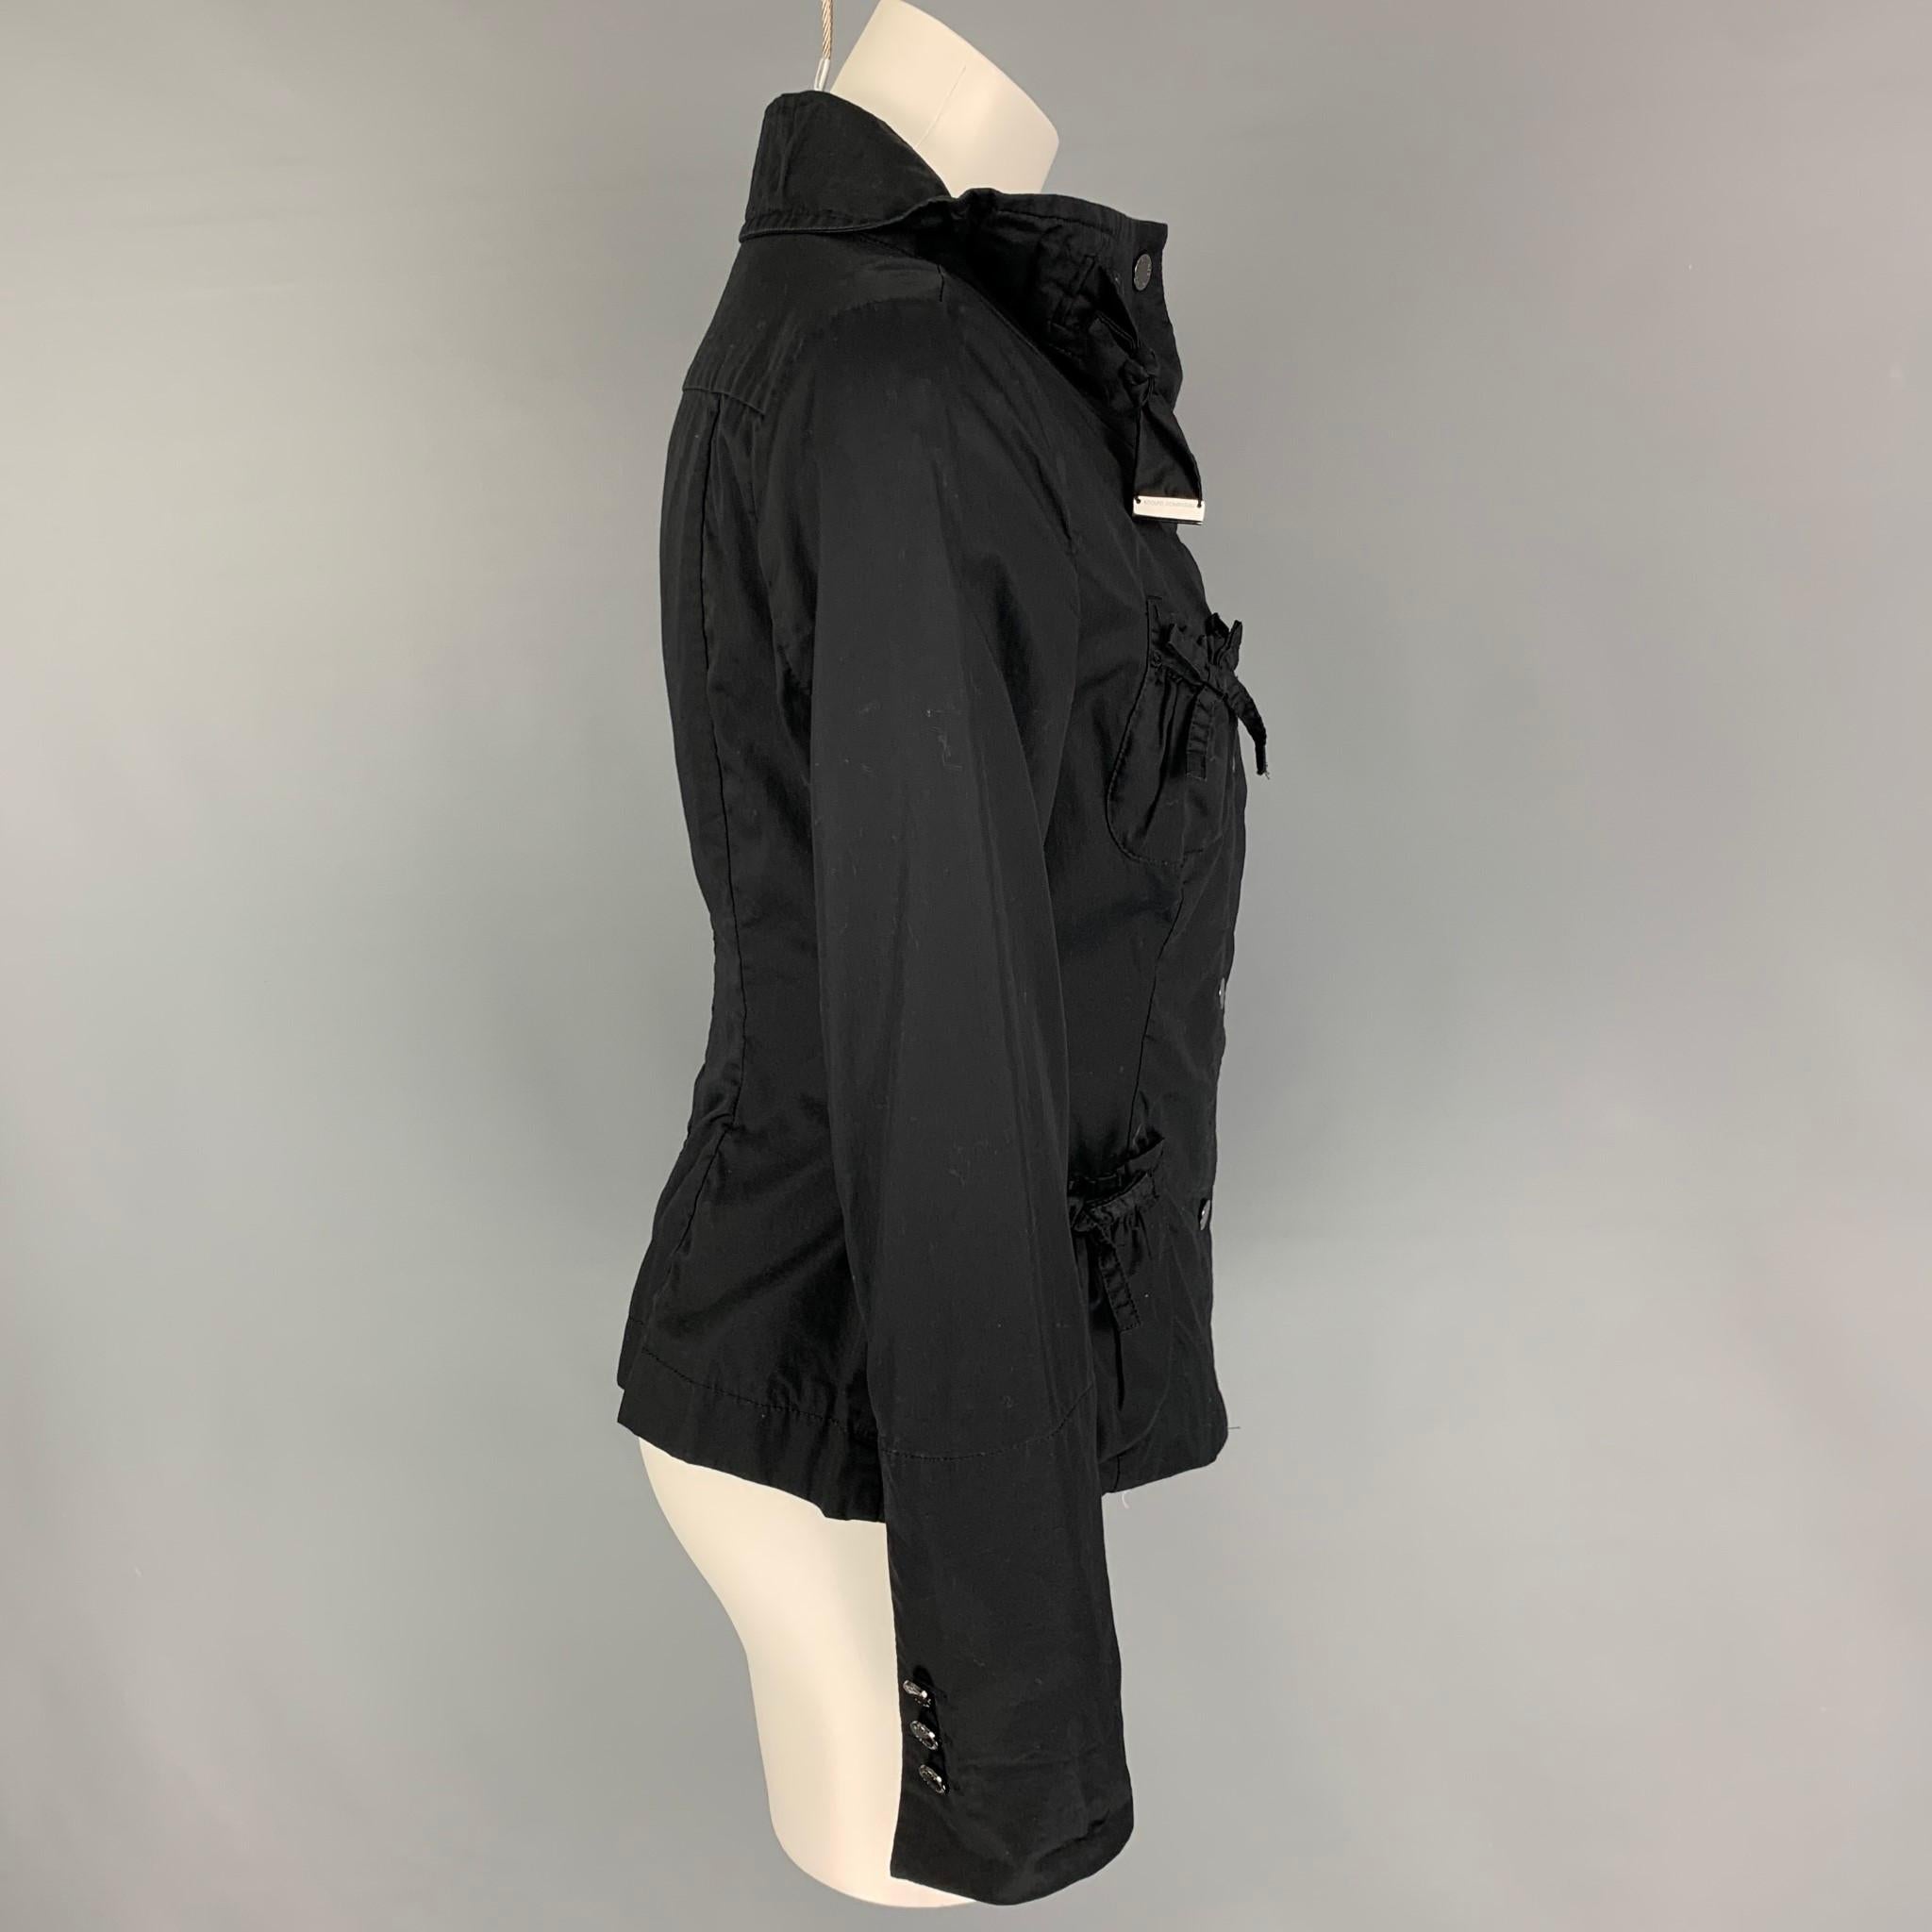 ADOLFO DOMINGUEZ jacket comes in a black cotton featuring a high neck, patch pockets, bow details, and a snap button closure 

Very Good Pre-Owned Condition.
Marked: 38

Measurements:

Shoulder: 16 in.
Bust: 36 in.
Sleeve: 24.5 in.
Length: 21 in. 